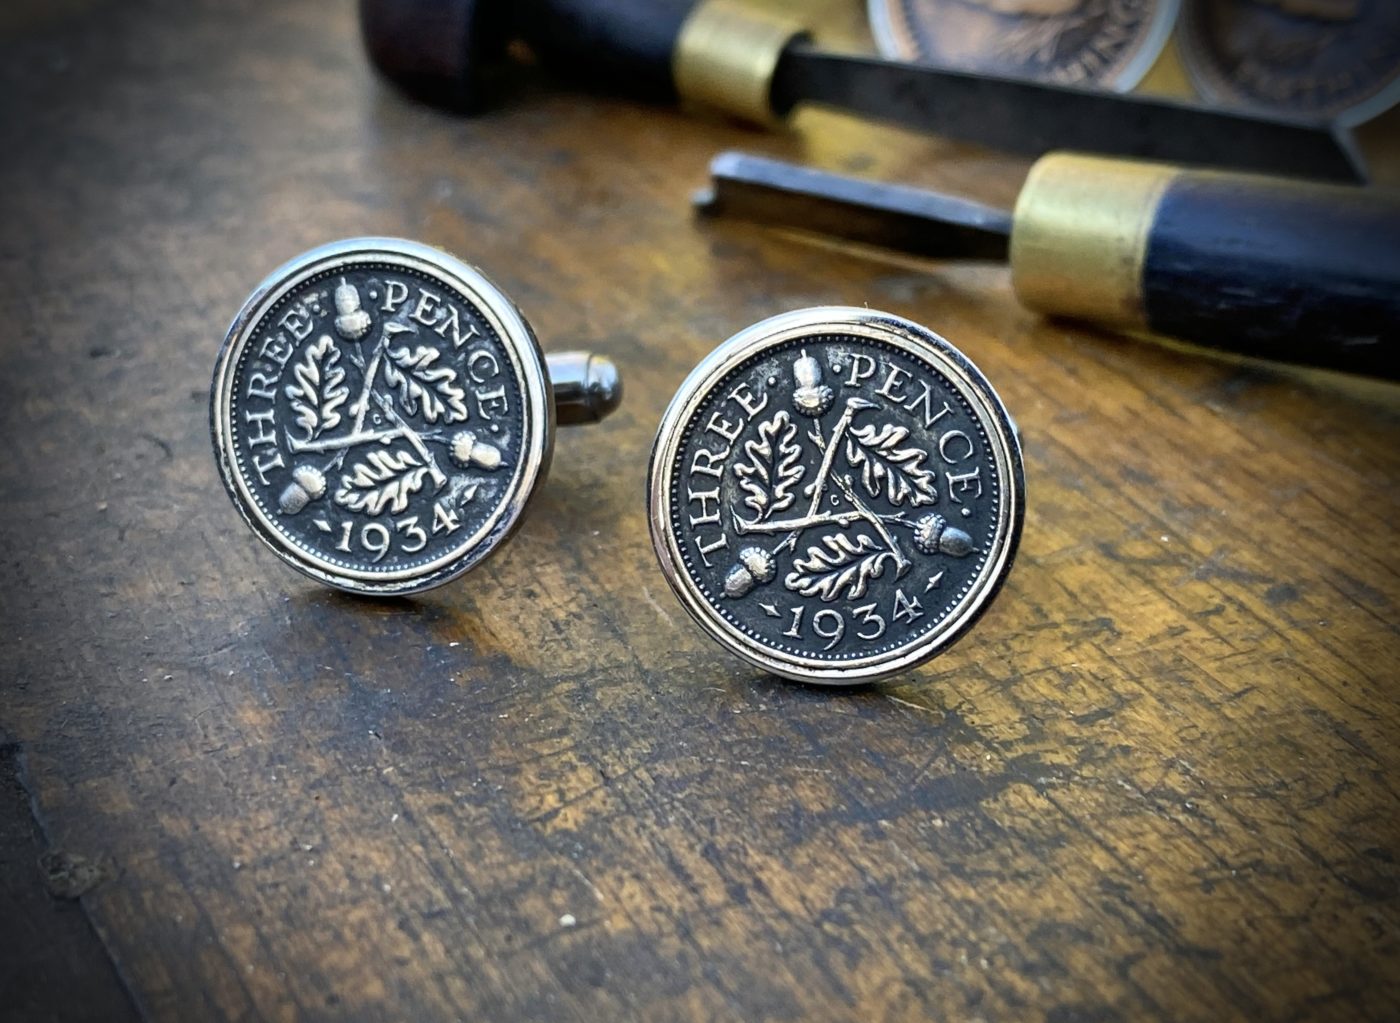 90th birthdaysilver coin cufflinks - Recycled silver threepence coins Handcrafted and recycled lucky threepence coin cufflinks